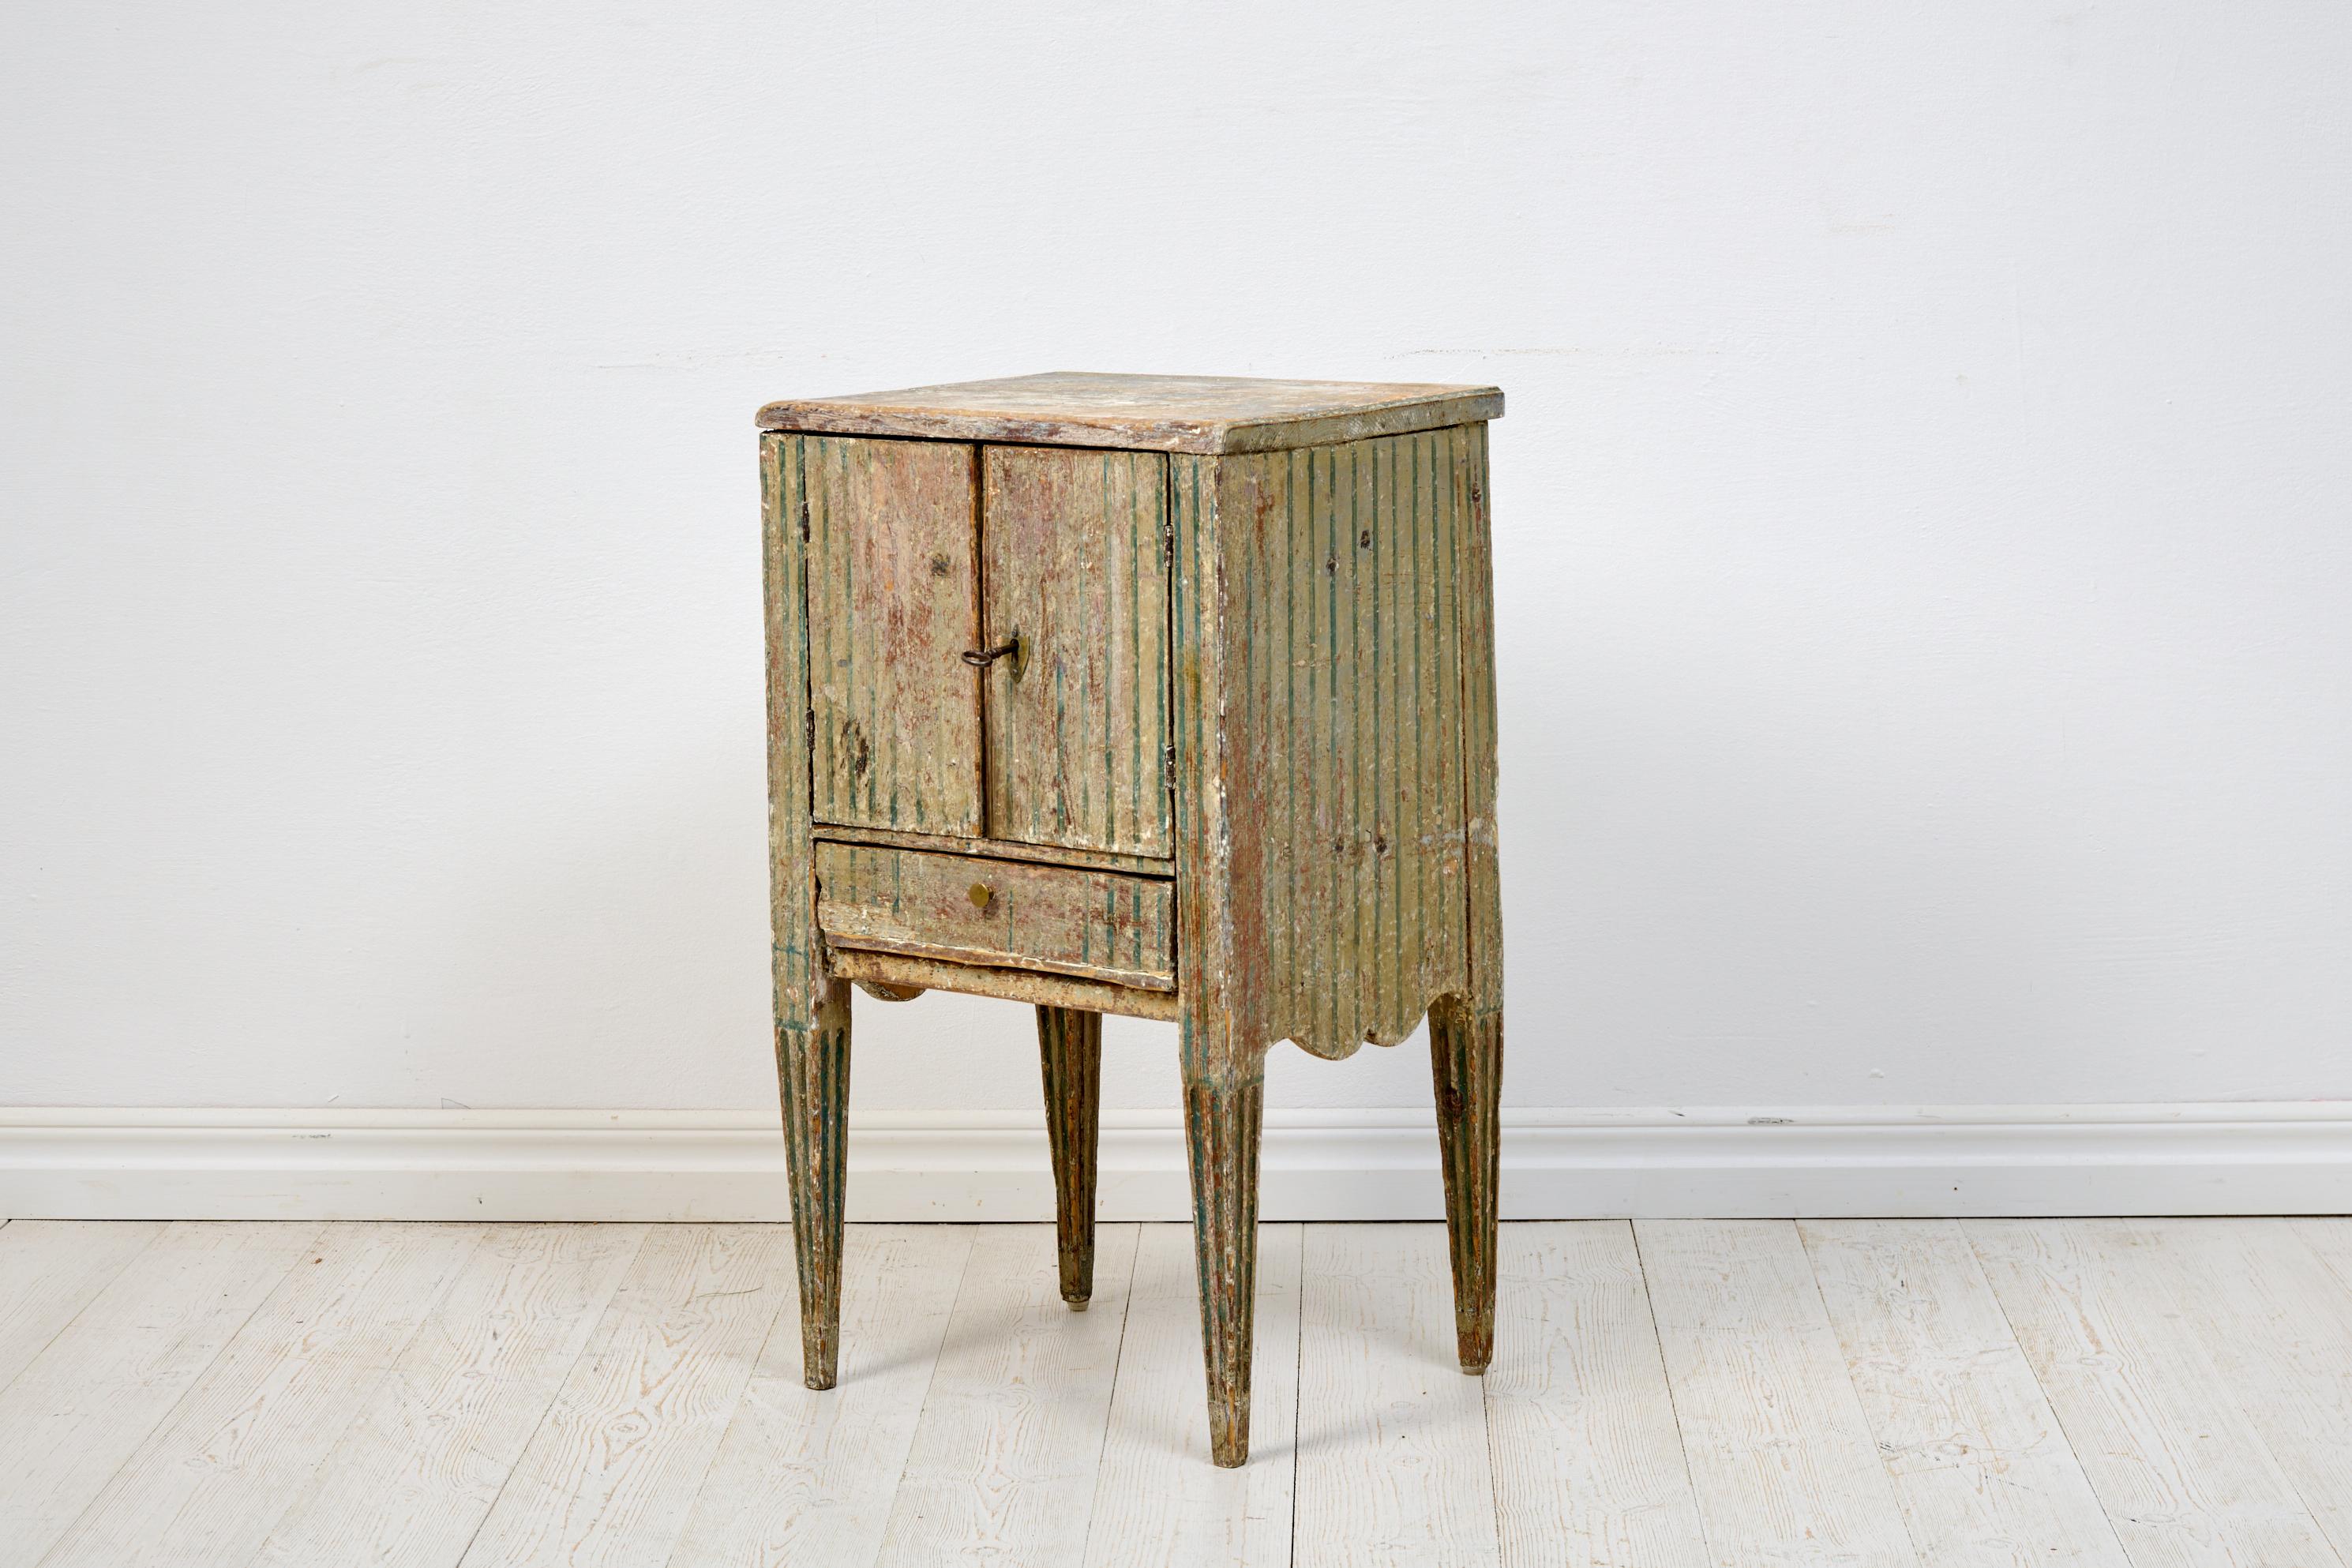 Rare Swedish antique nightstand in gustavian style. The nightstand is made around 1790 in Sweden with a frame in solid pine. Original paint and a very unusual detail is the painted stripes. The paint is from the late 1700s and has marks and distress